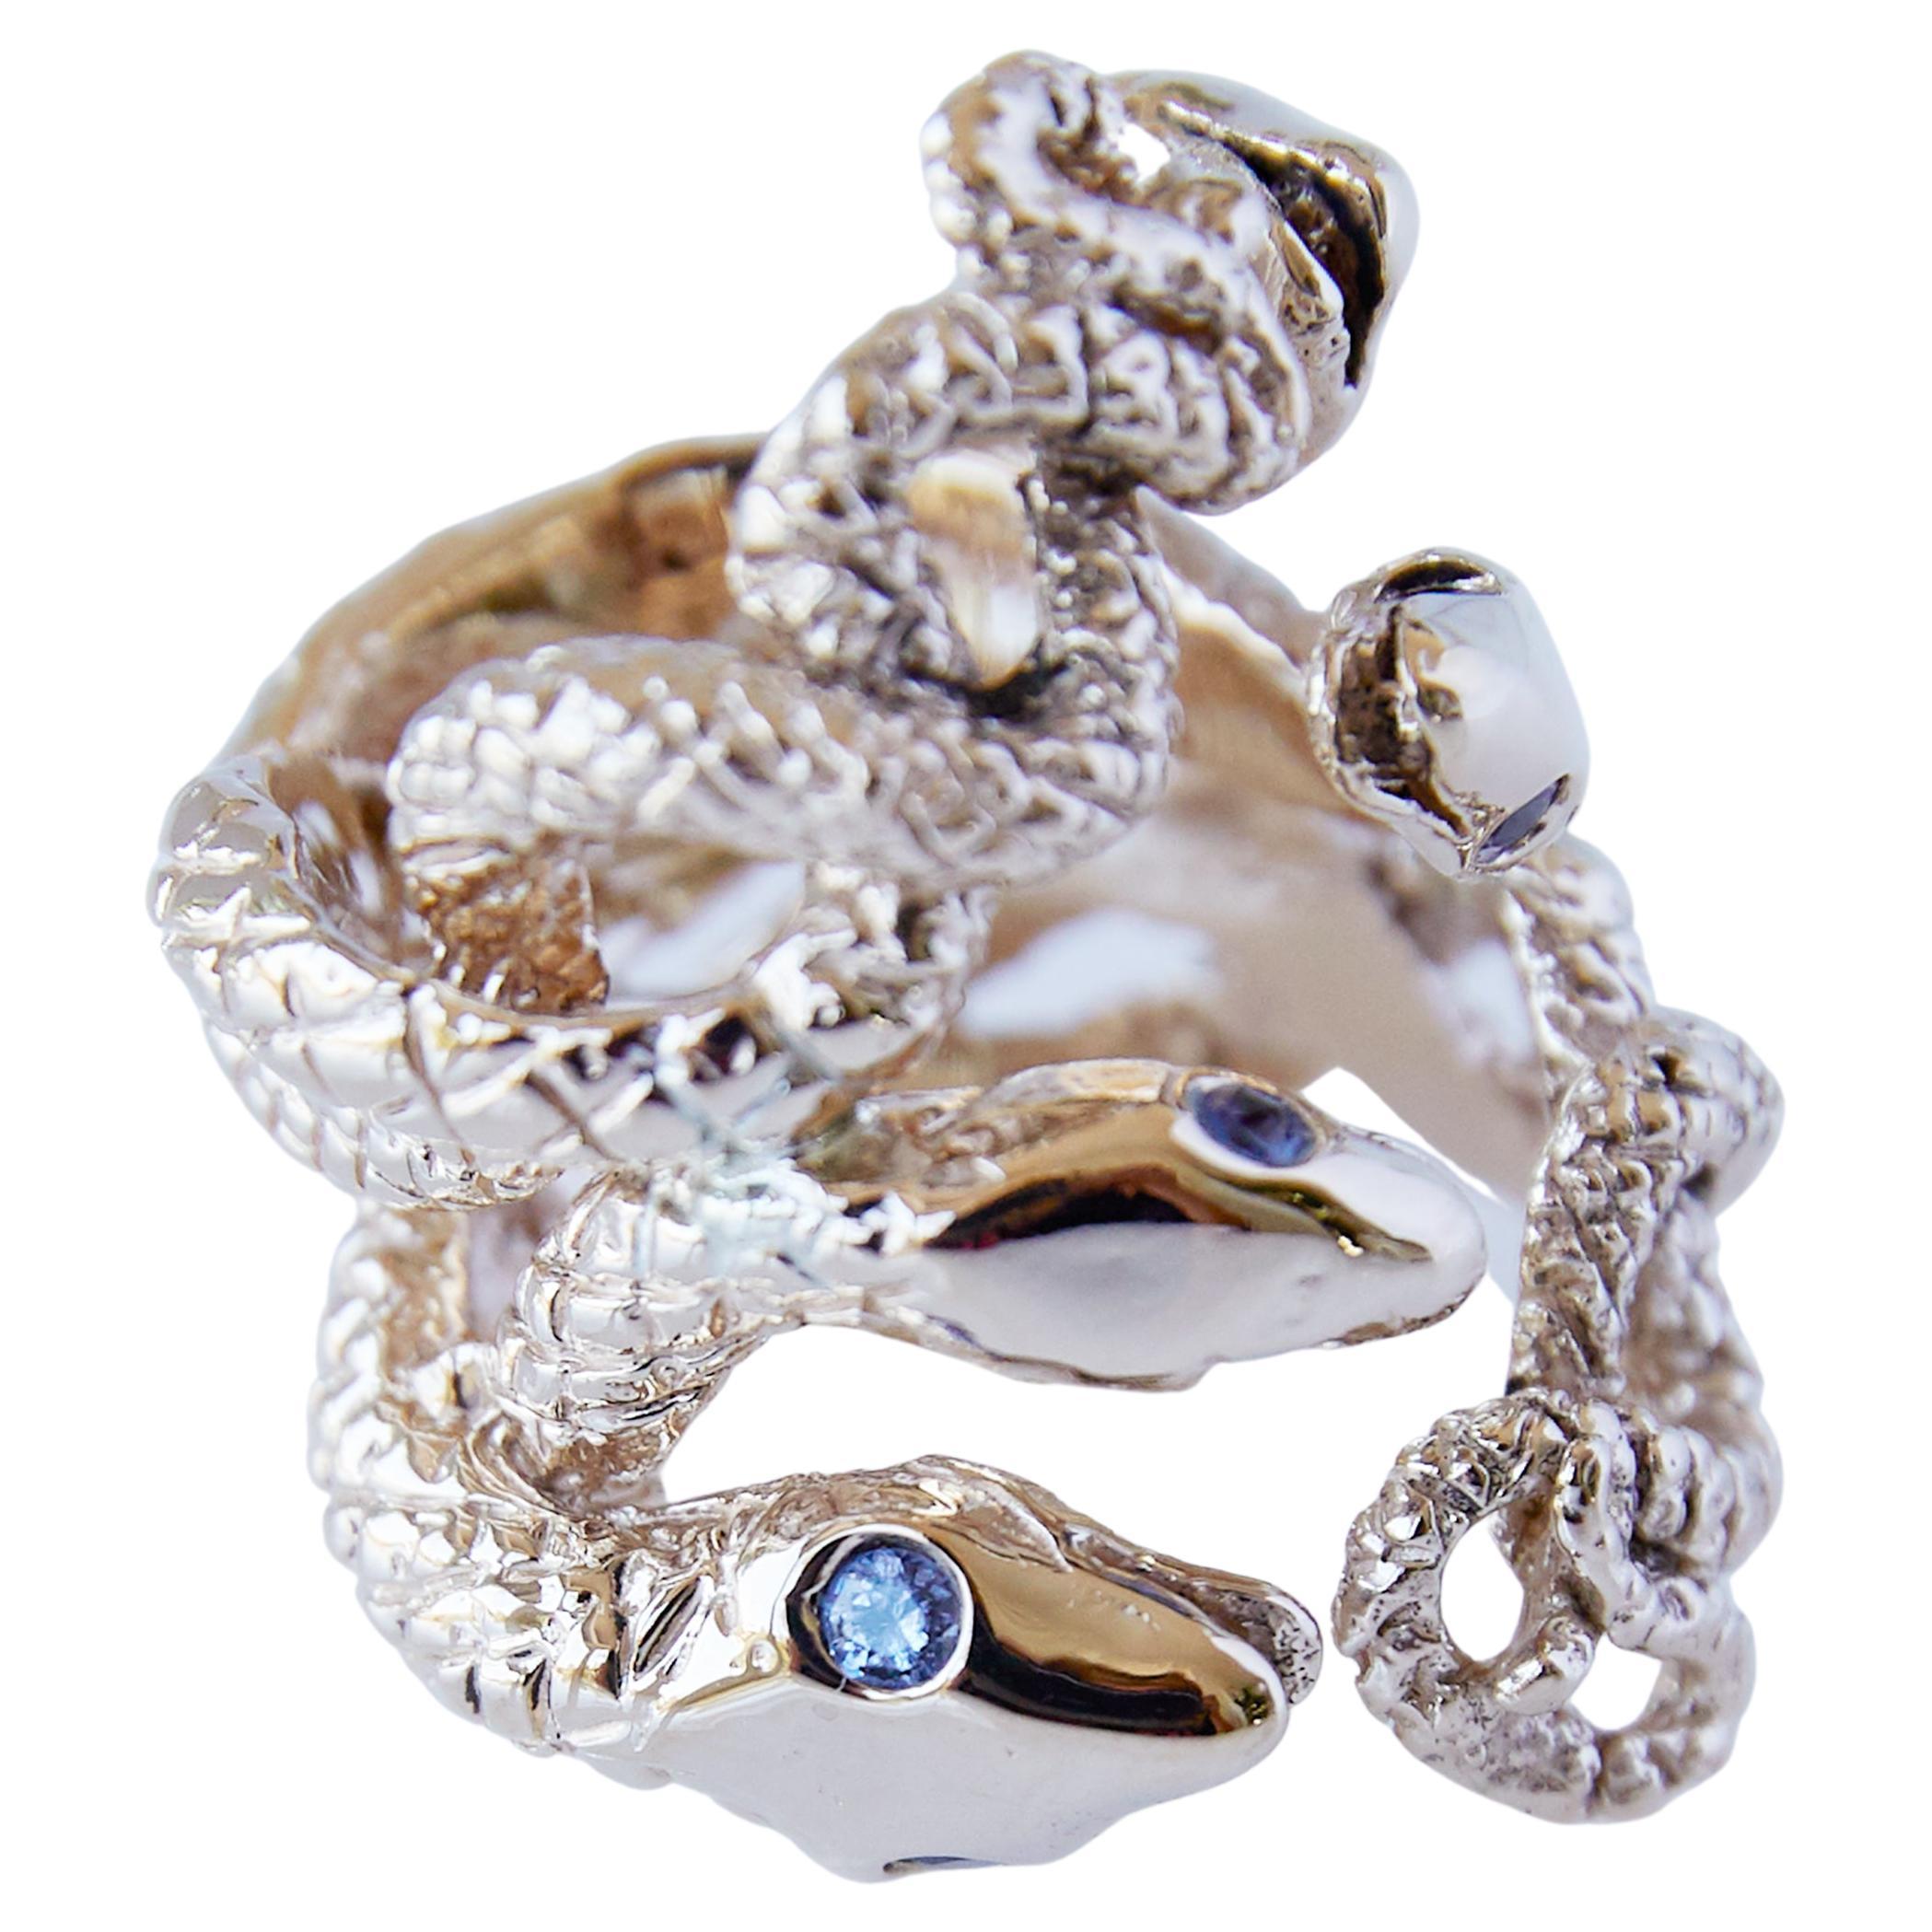 Contemporary Tanzanite Snake Ring Gold Cocktail Ring Adjustable J Dauphin For Sale